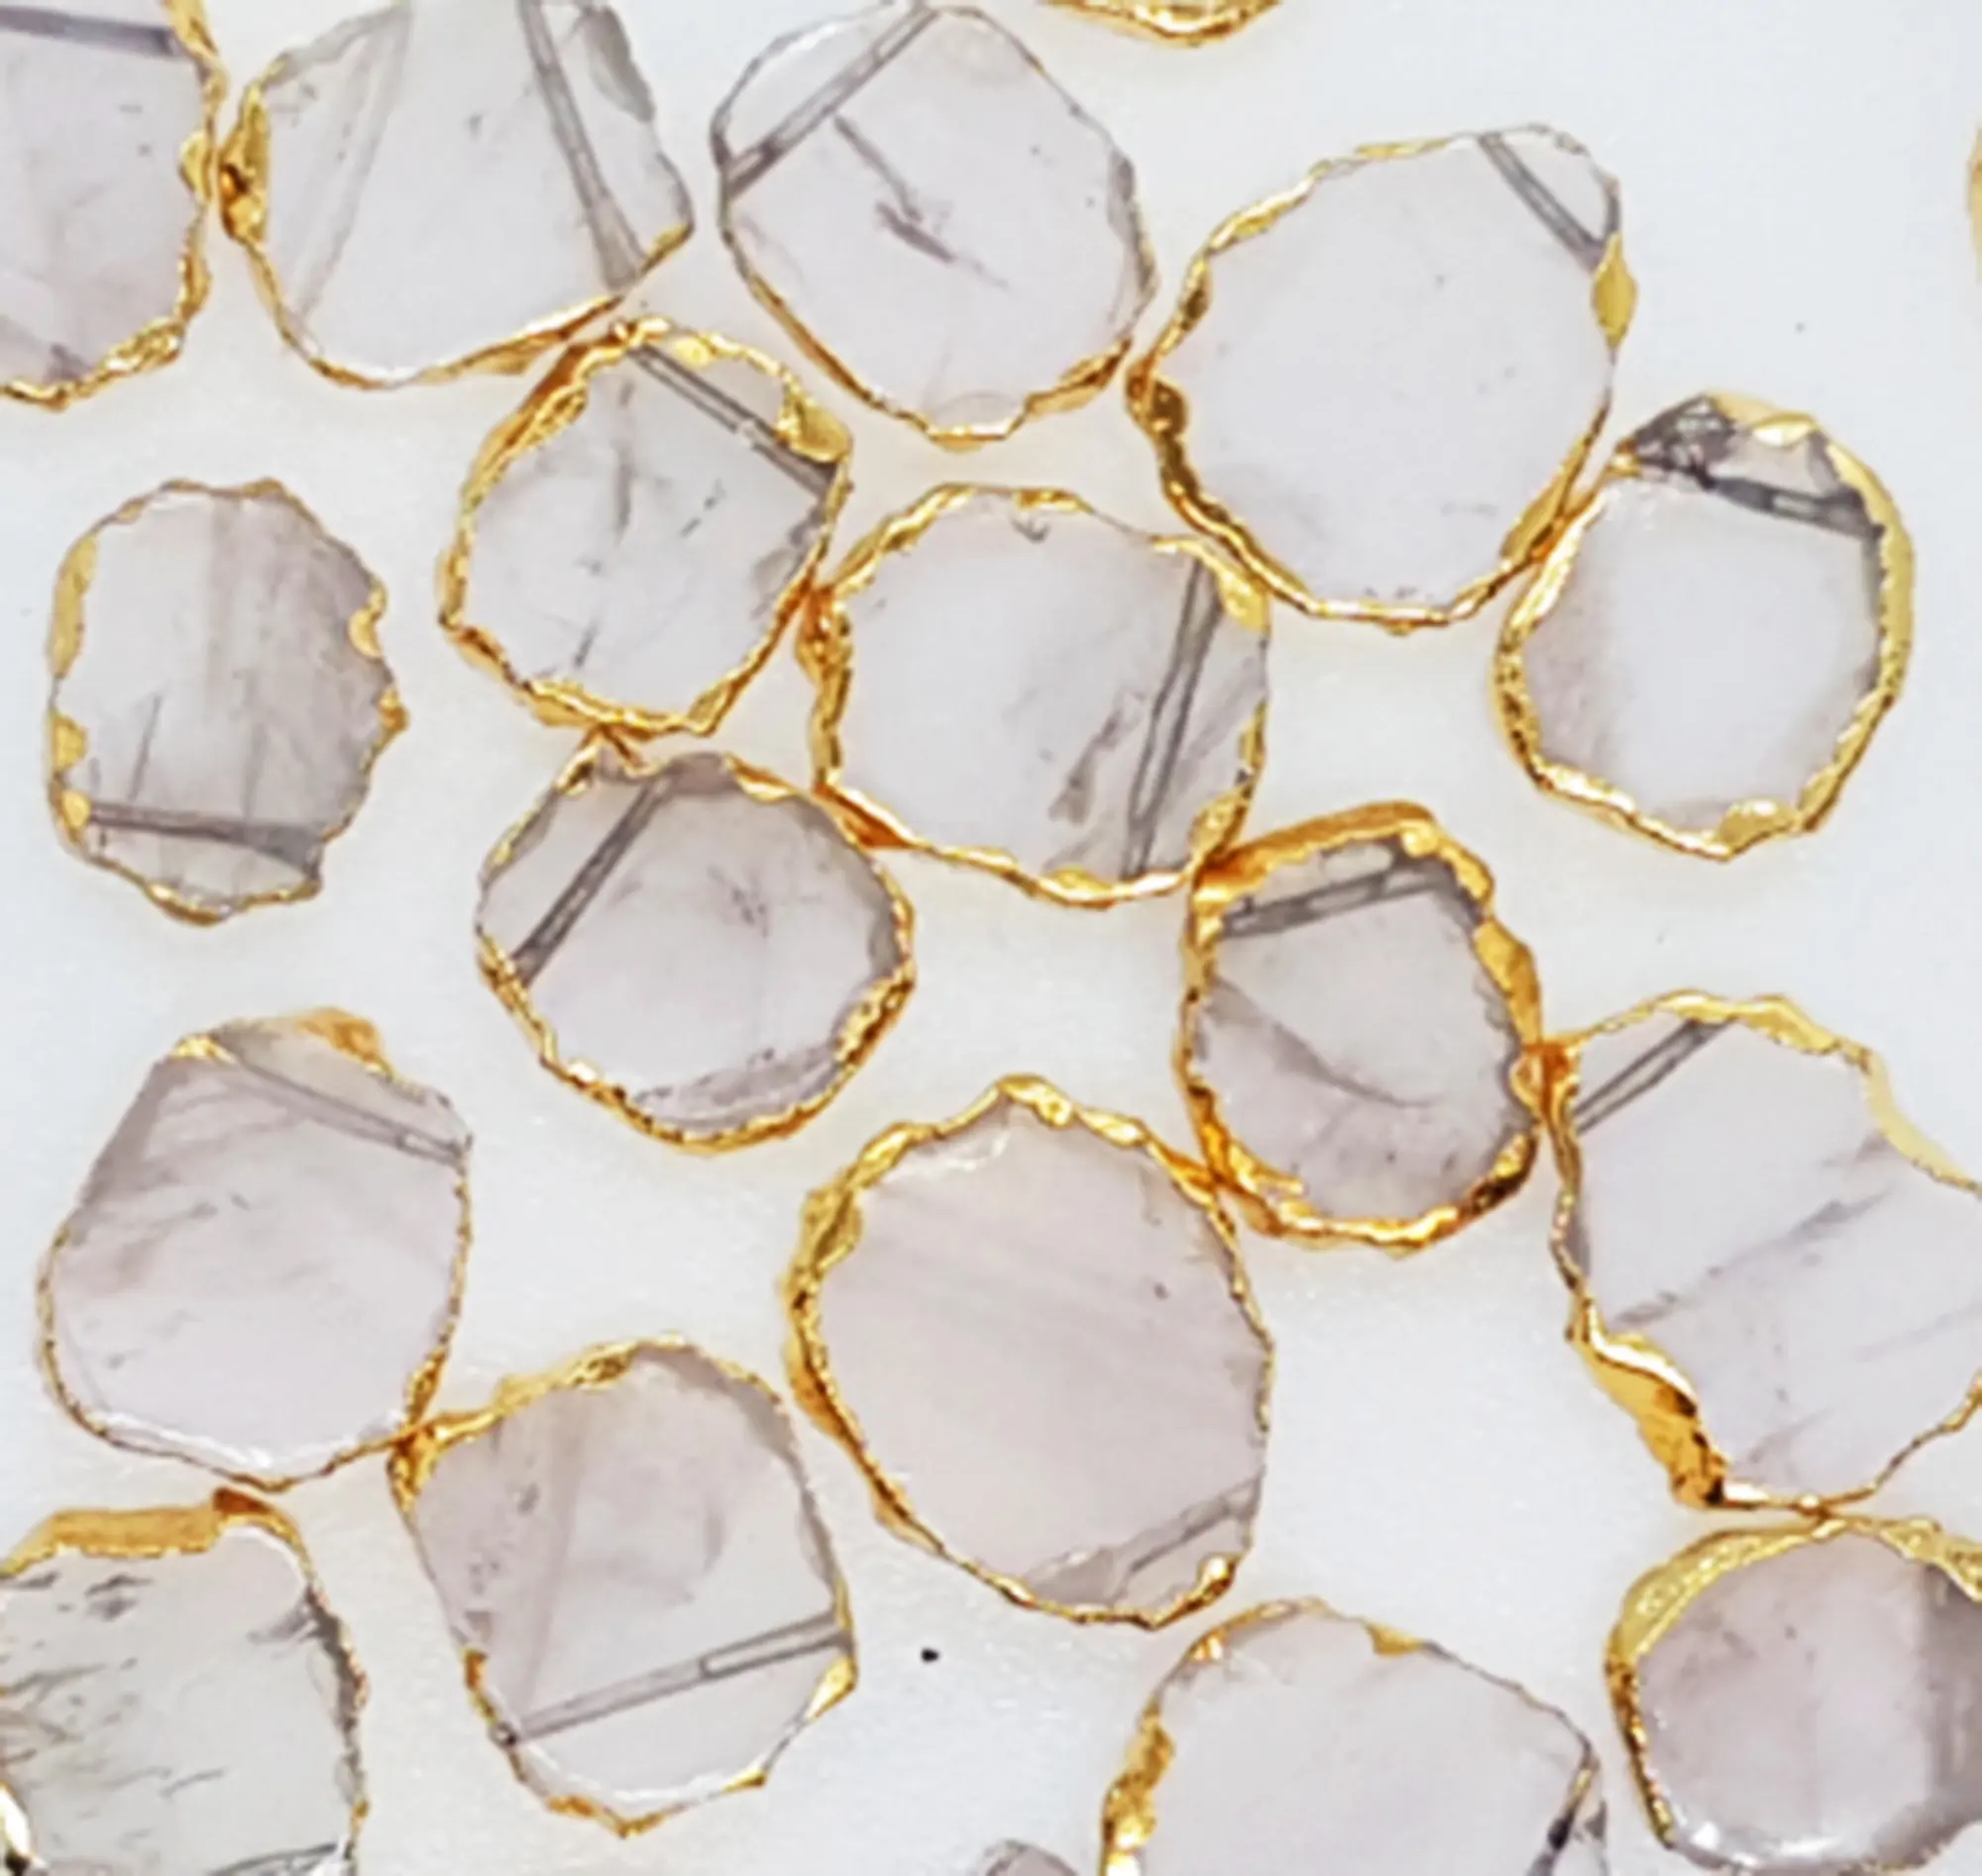 Natural Rose Quartz Polished Gold Electro Plated Slices, Drilled Slices For Making Pendant Jewelry, Wholesale Gemstone Slices